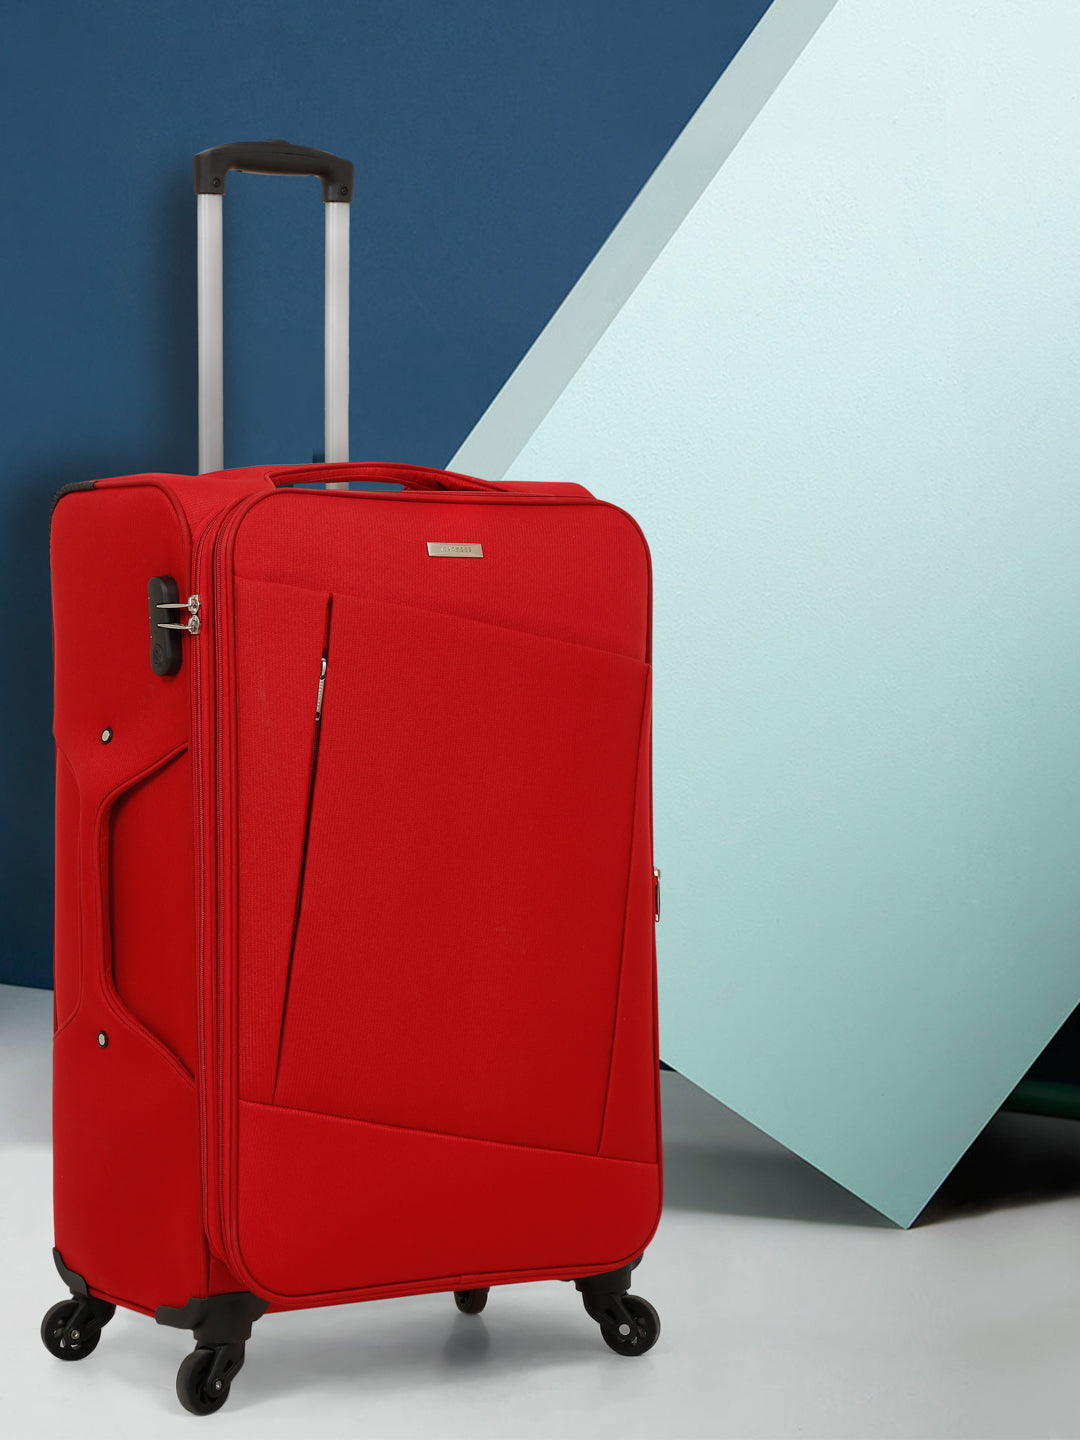 Best Carry-On Plus Suitcases | Cabin Size Monos Travel Luggage